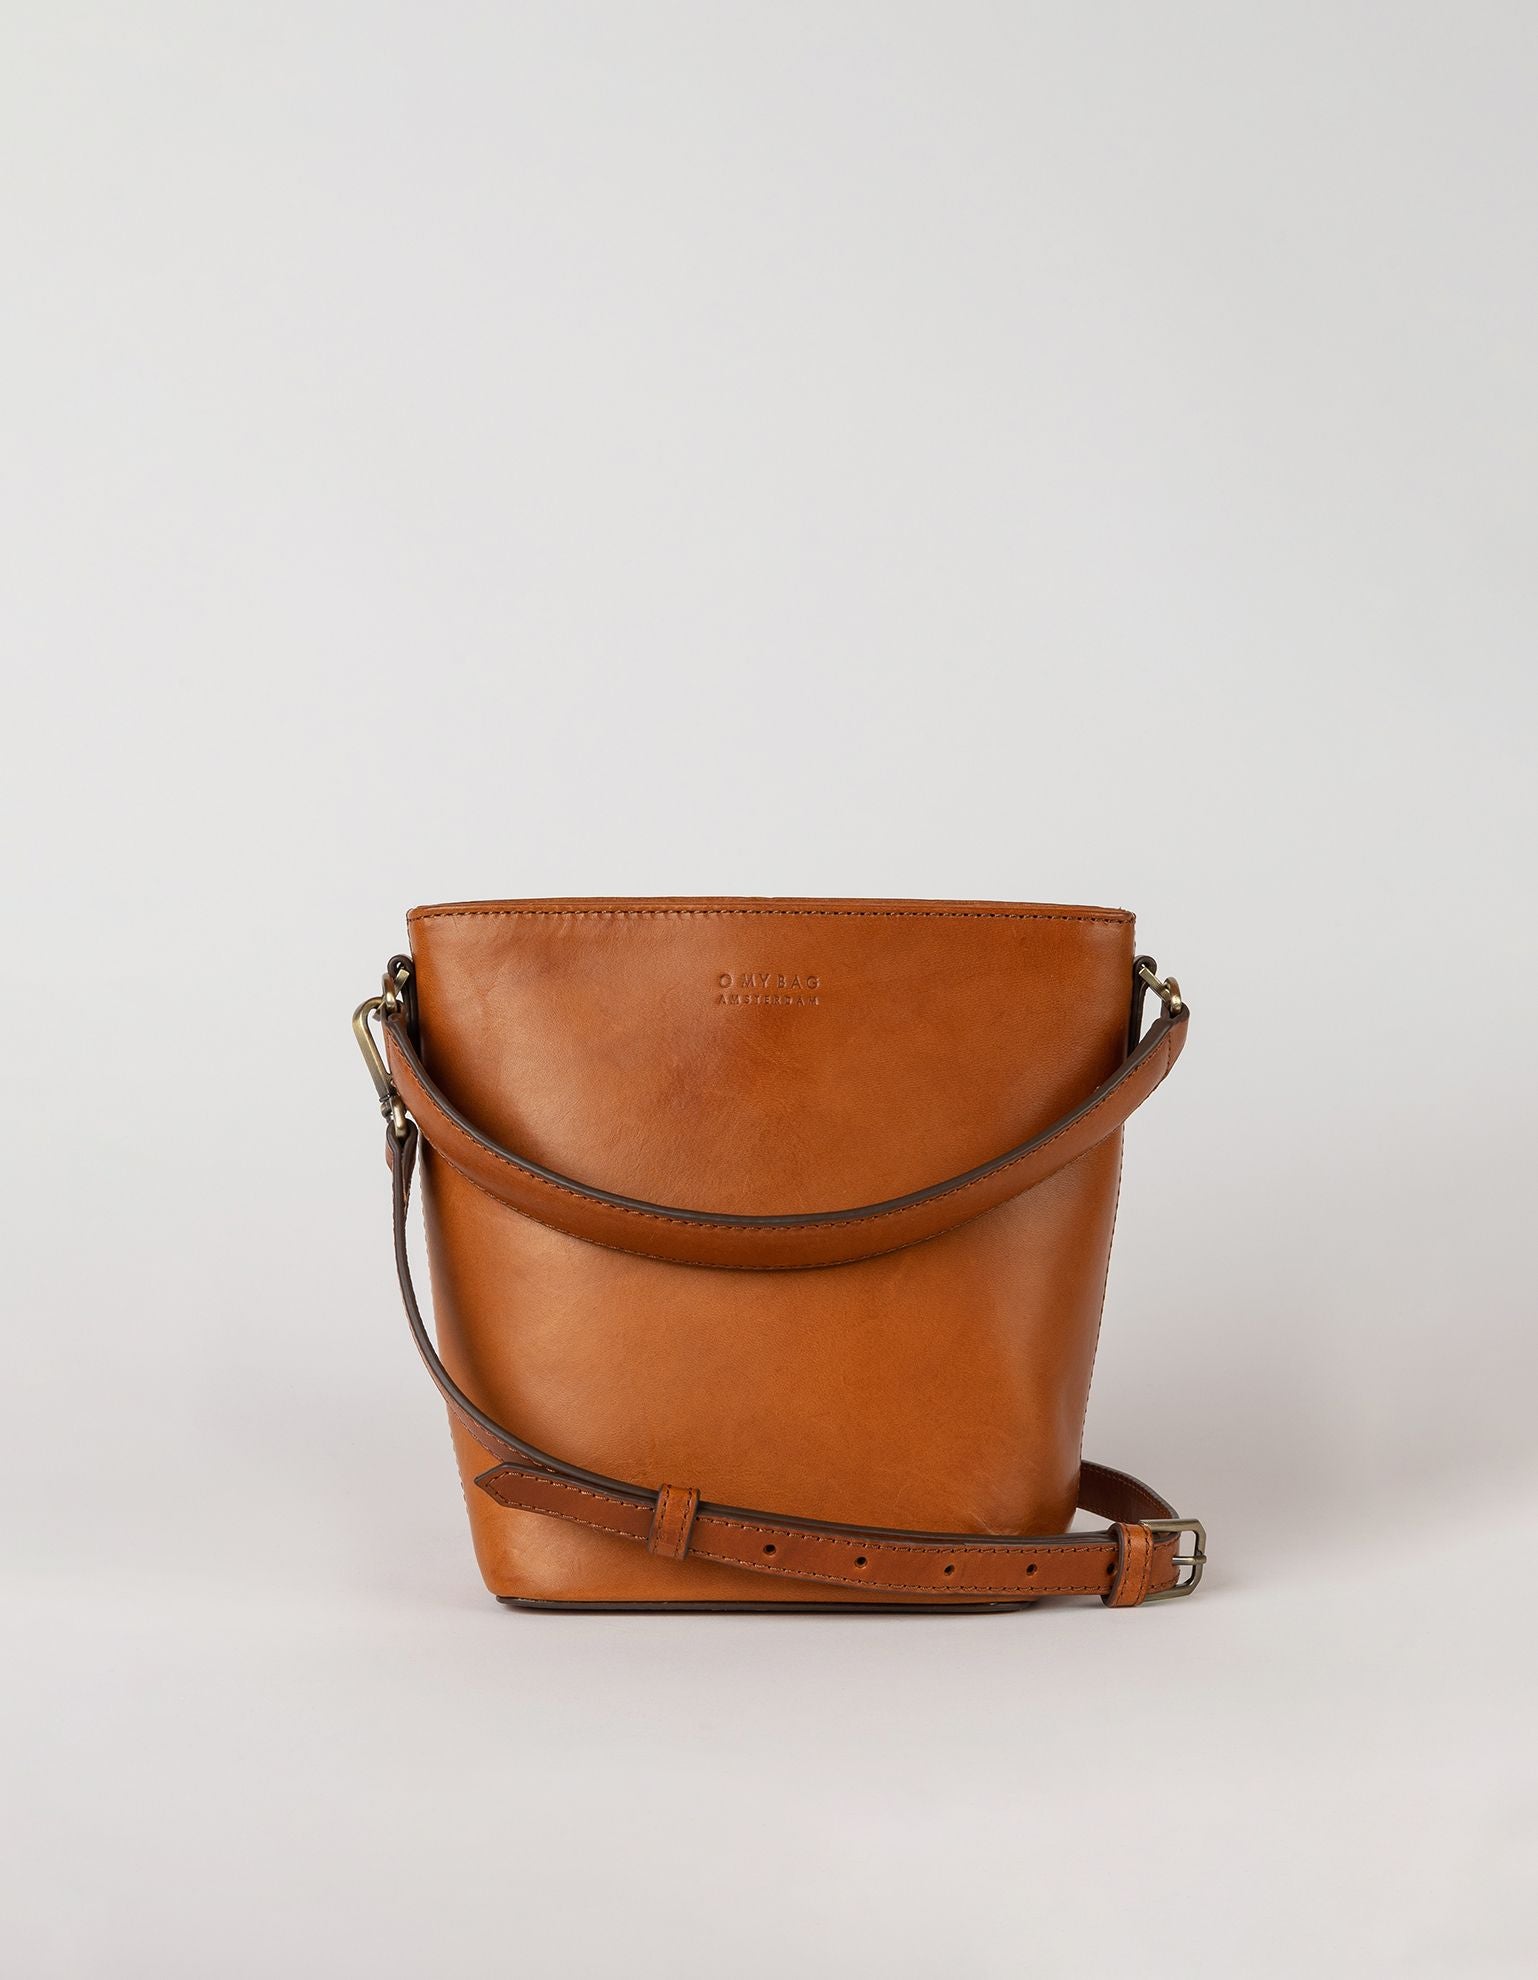 Small Cognac Bucket bag. Removable long strap. Front product image